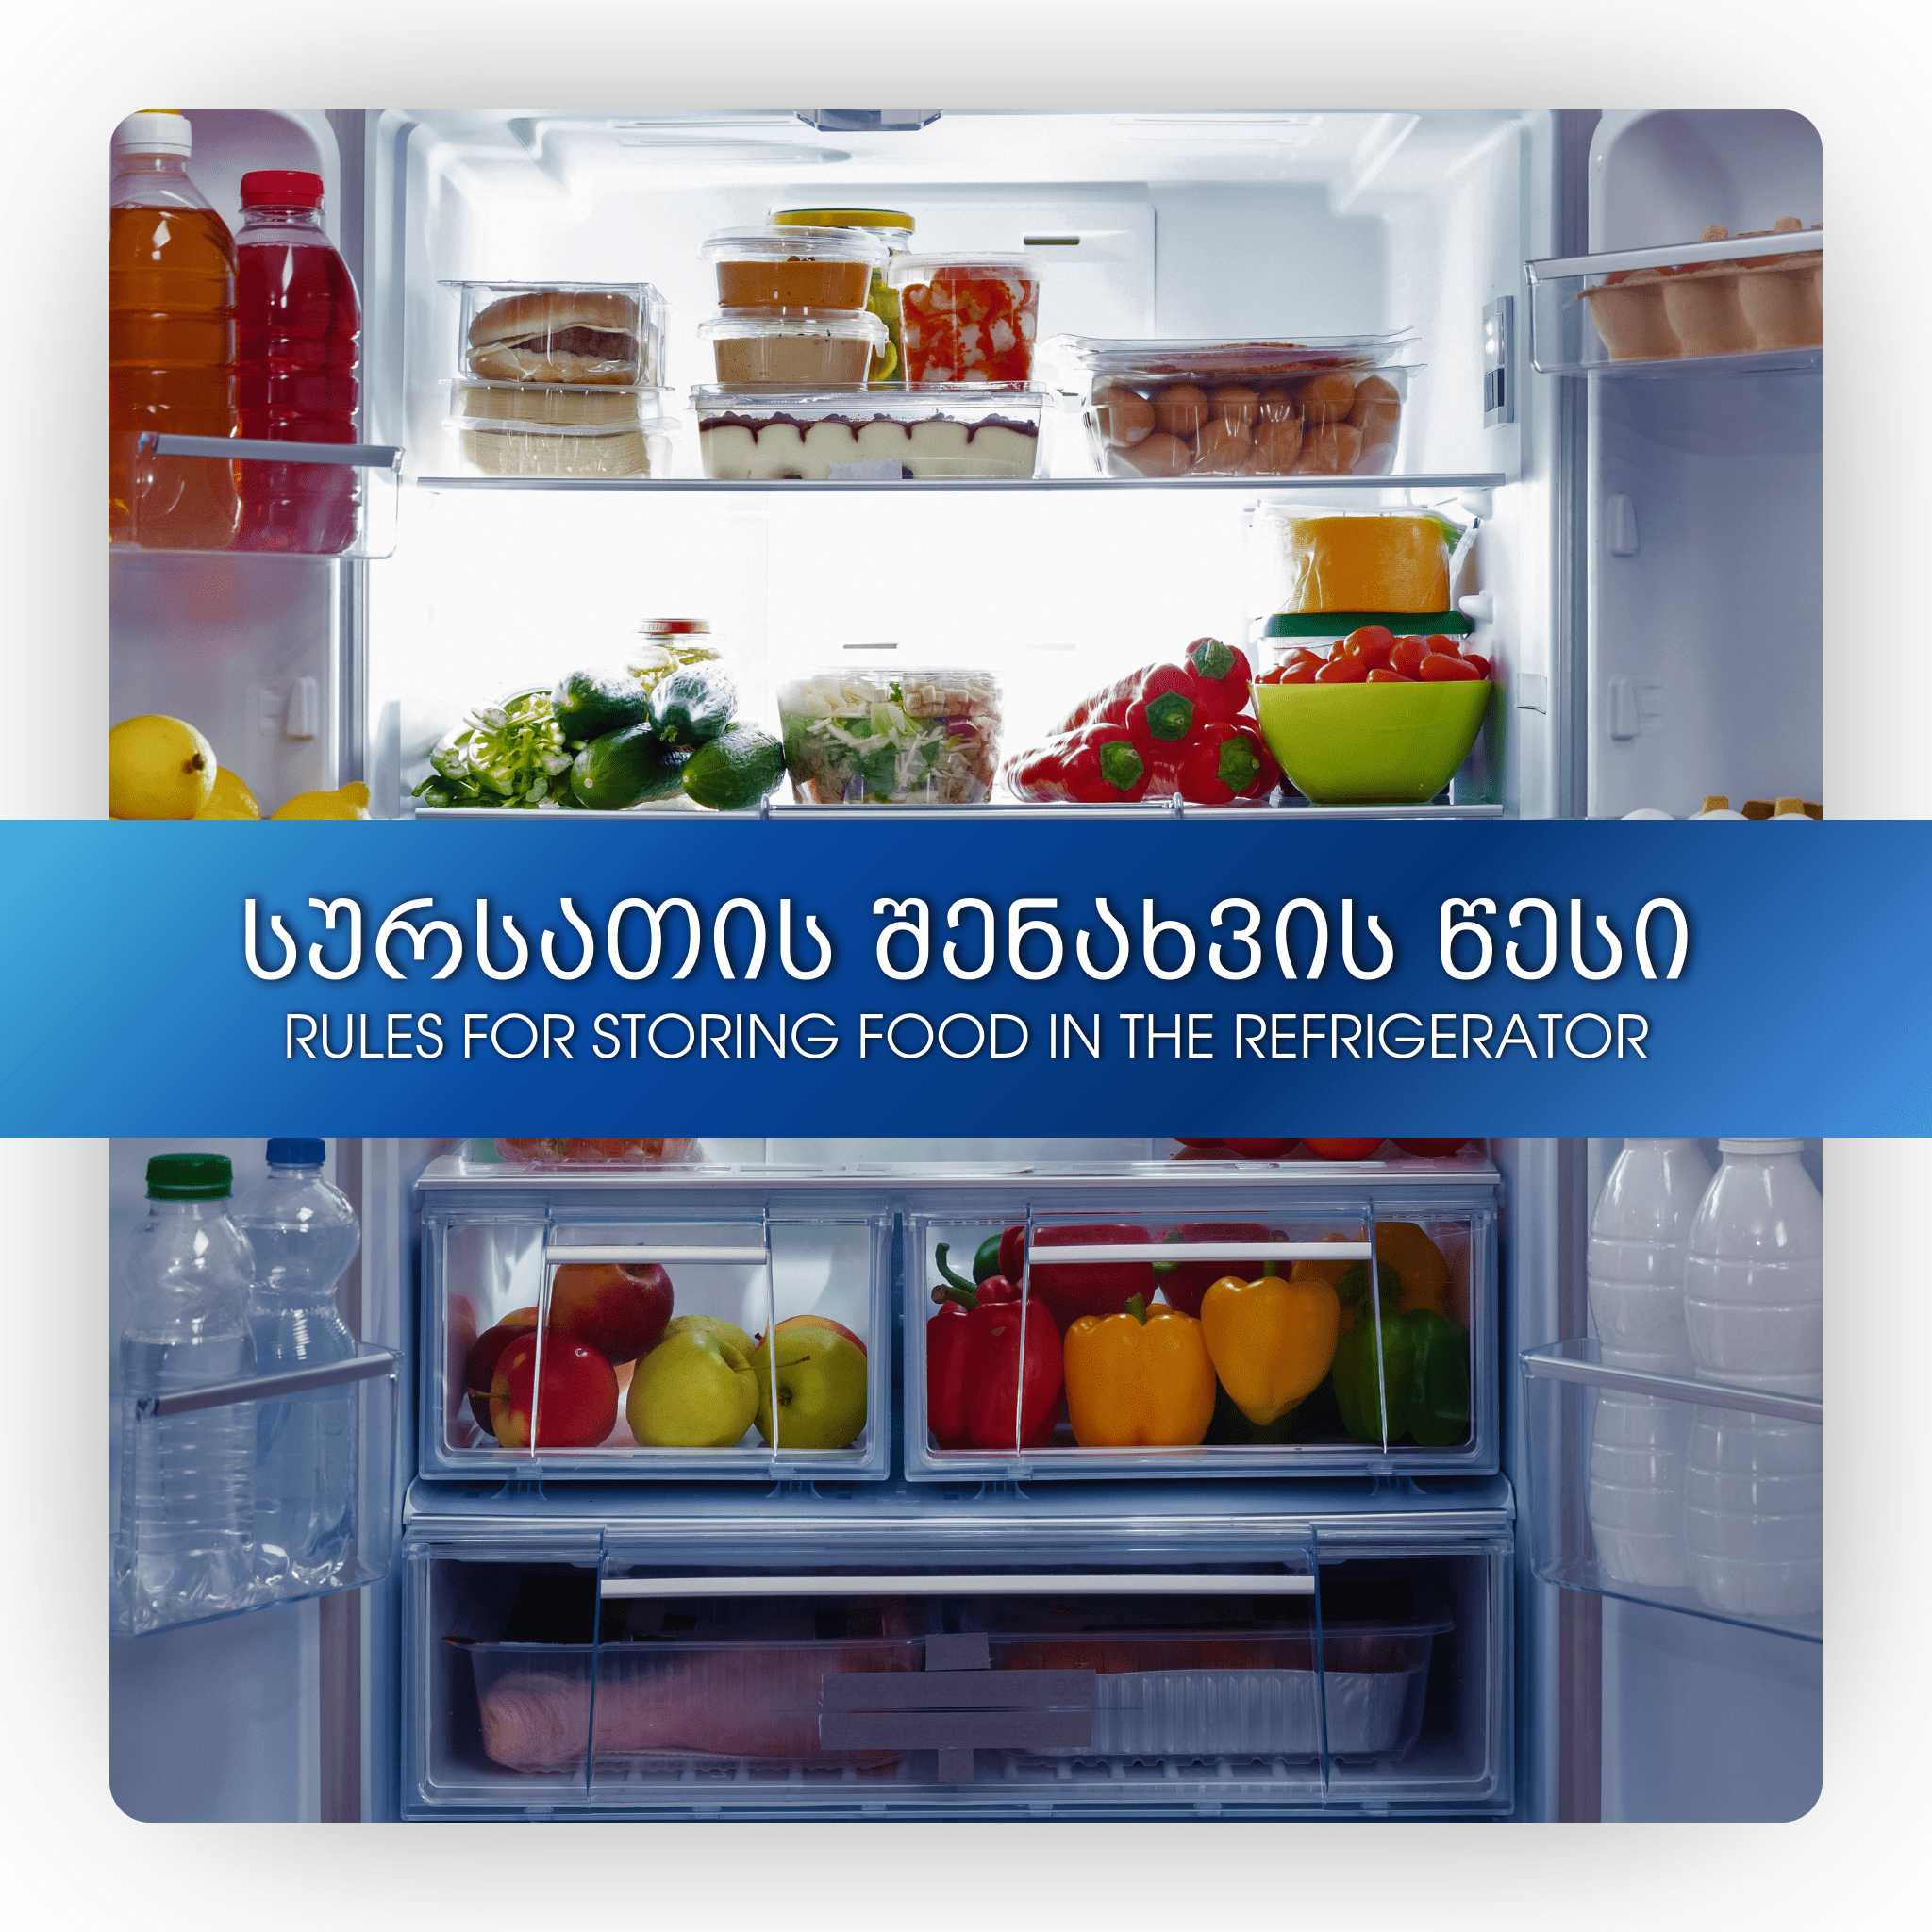 Rules for Storing Food in the Refrigerator